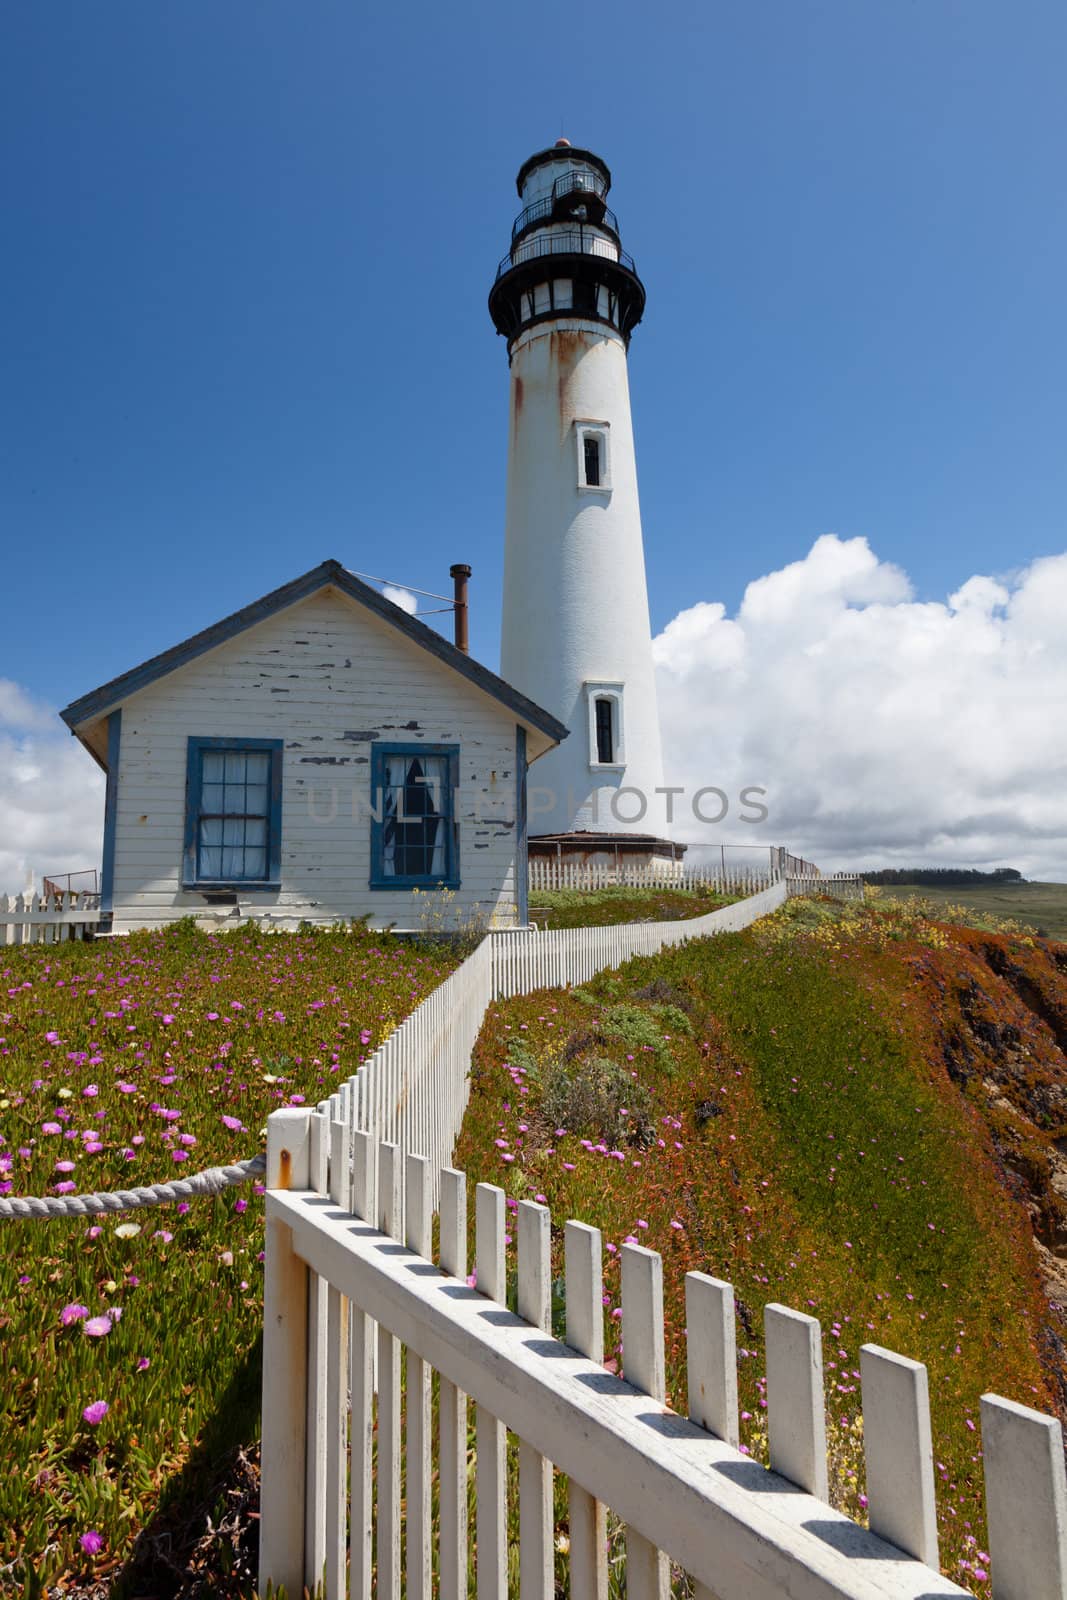 Pigeon Point Lighthouse is a lighthouse built in 1871 to guide ships on the Pacific coast of California.